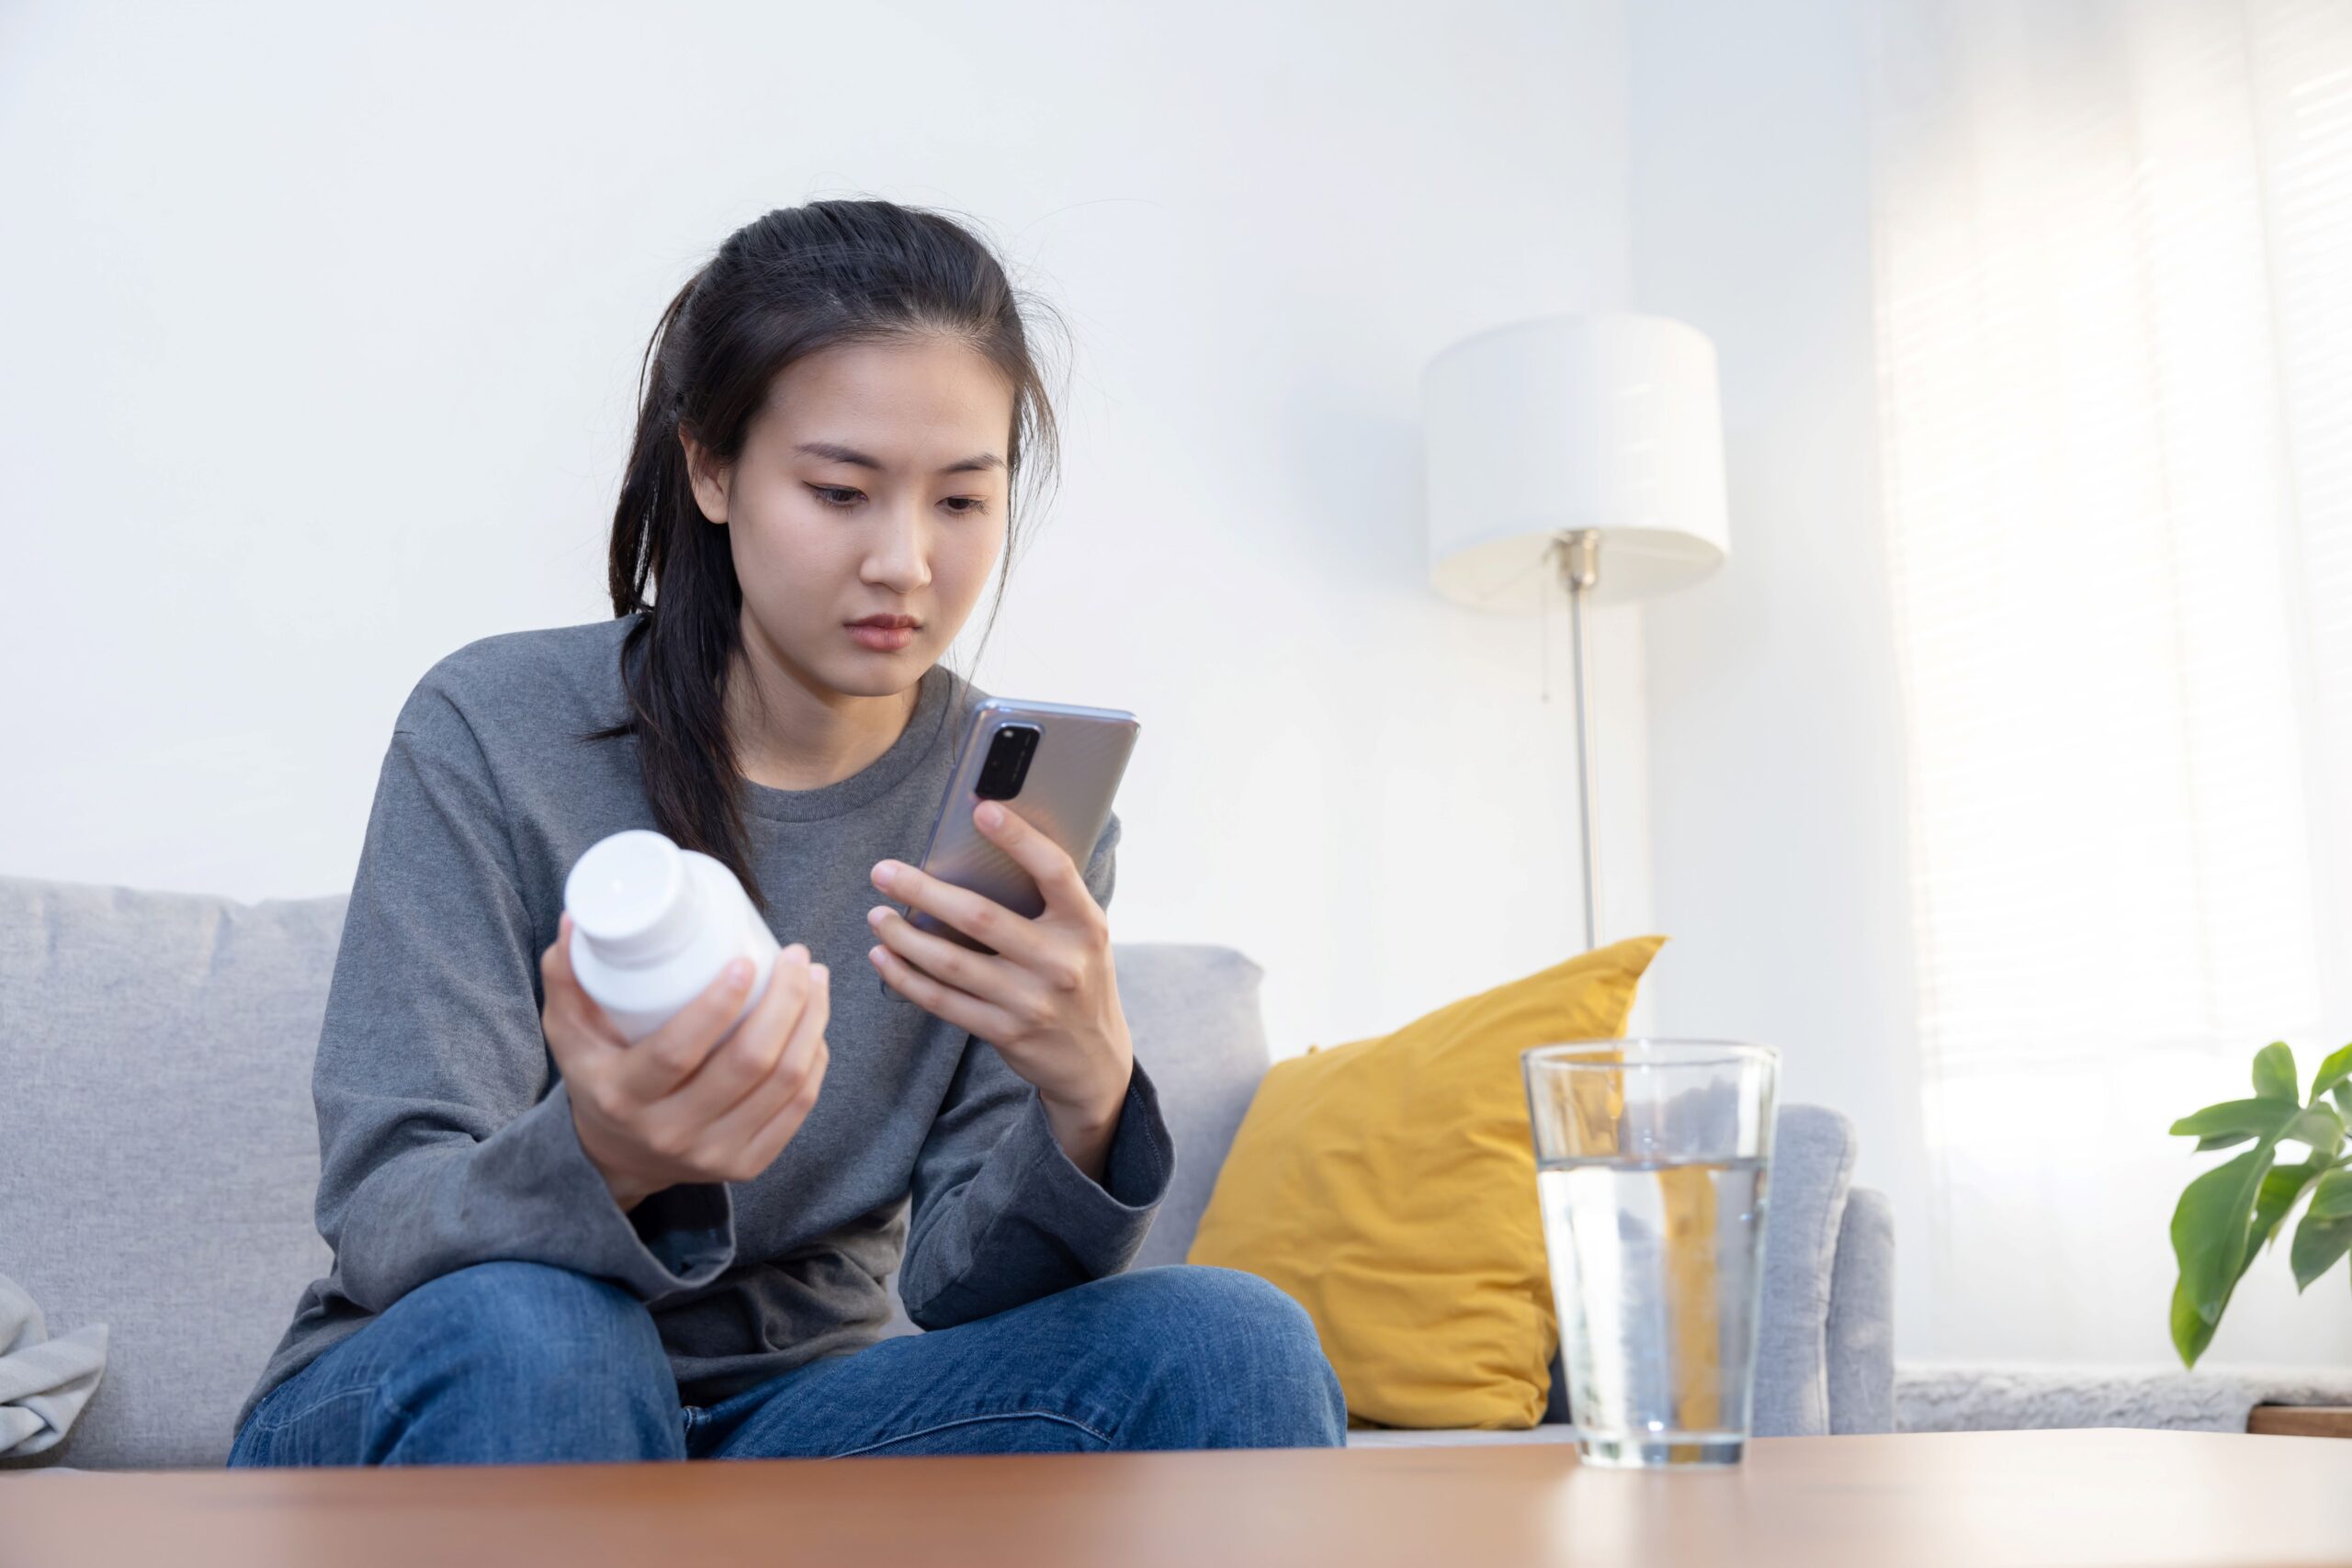 Woman sitting on couch with product bottle looking up information on her phone